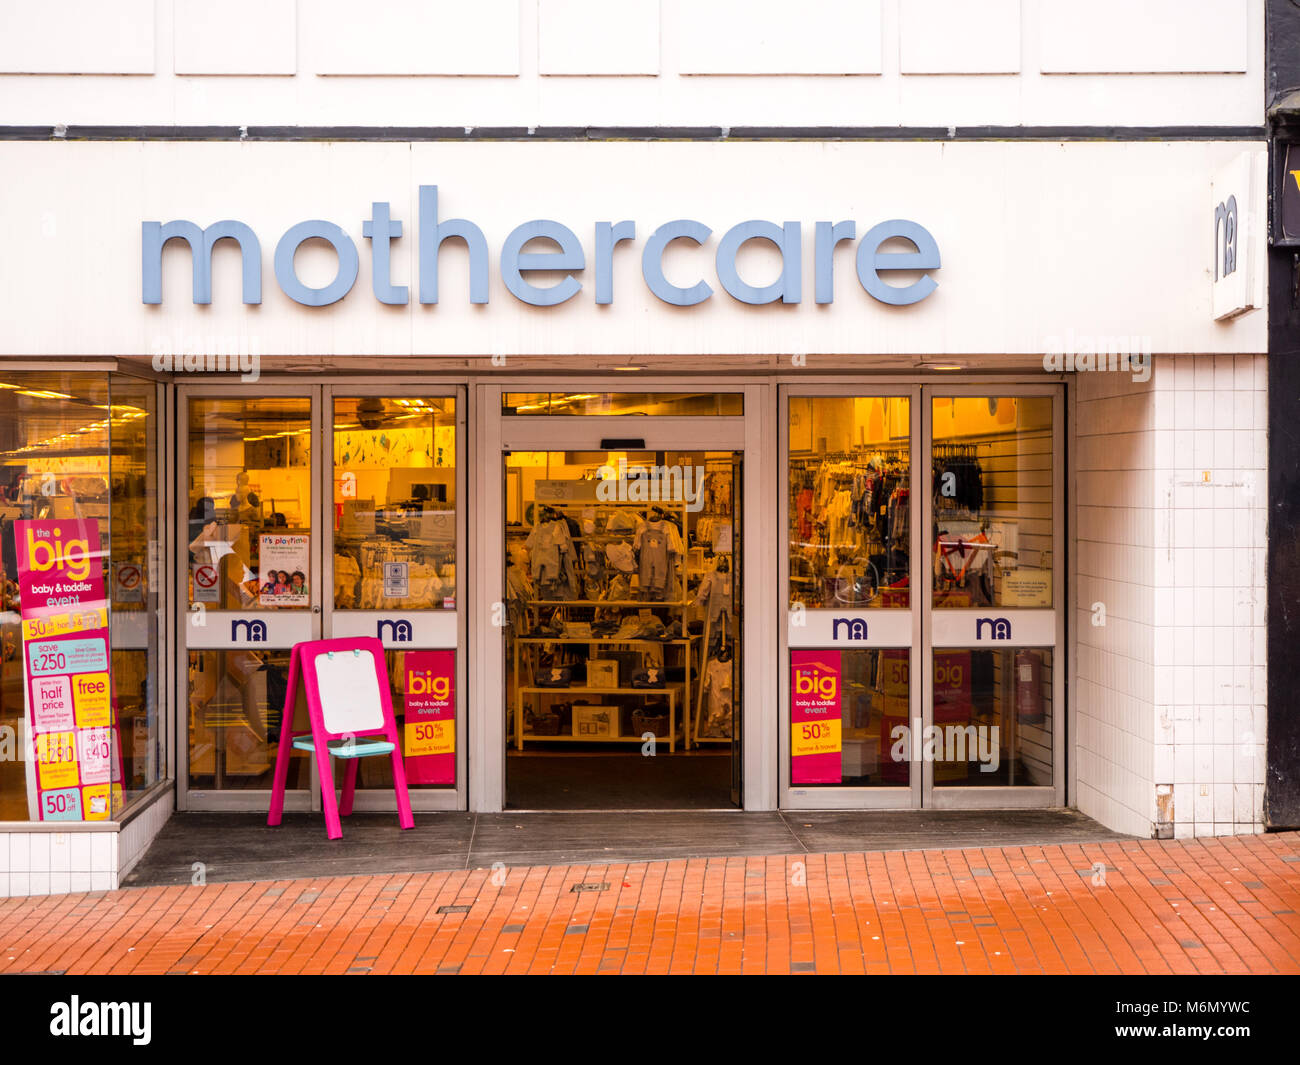 Mothercare Reading High Resolution Stock Photography and Images - Alamy